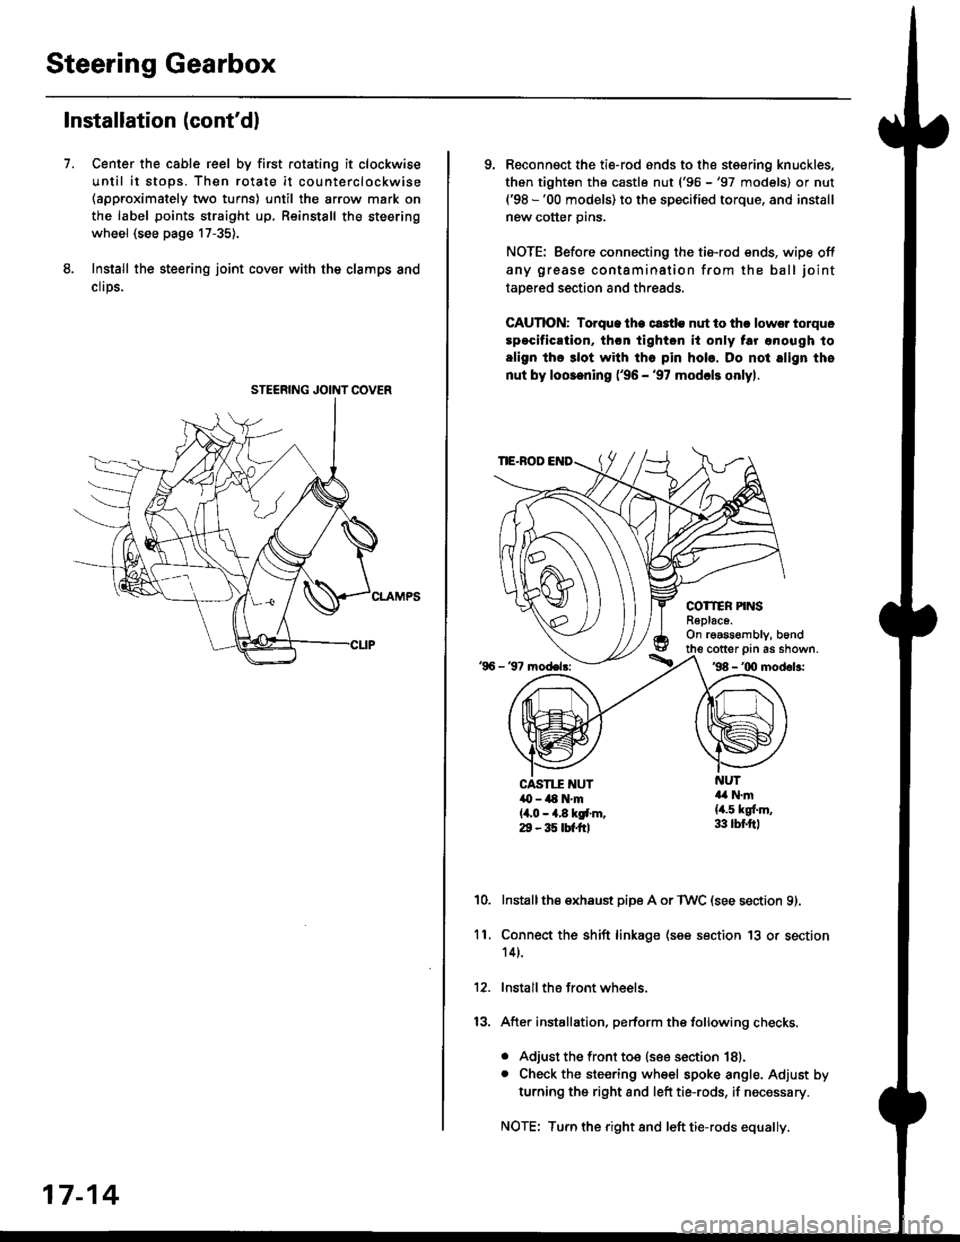 HONDA CIVIC 1998 6.G User Guide Steering Gearbox
Installation (contdl
Center the cable reel by first rotating it clockwise
until it stops. Then rotate it counterclockwise(approximately two turns) until the arrow mark on
the label p